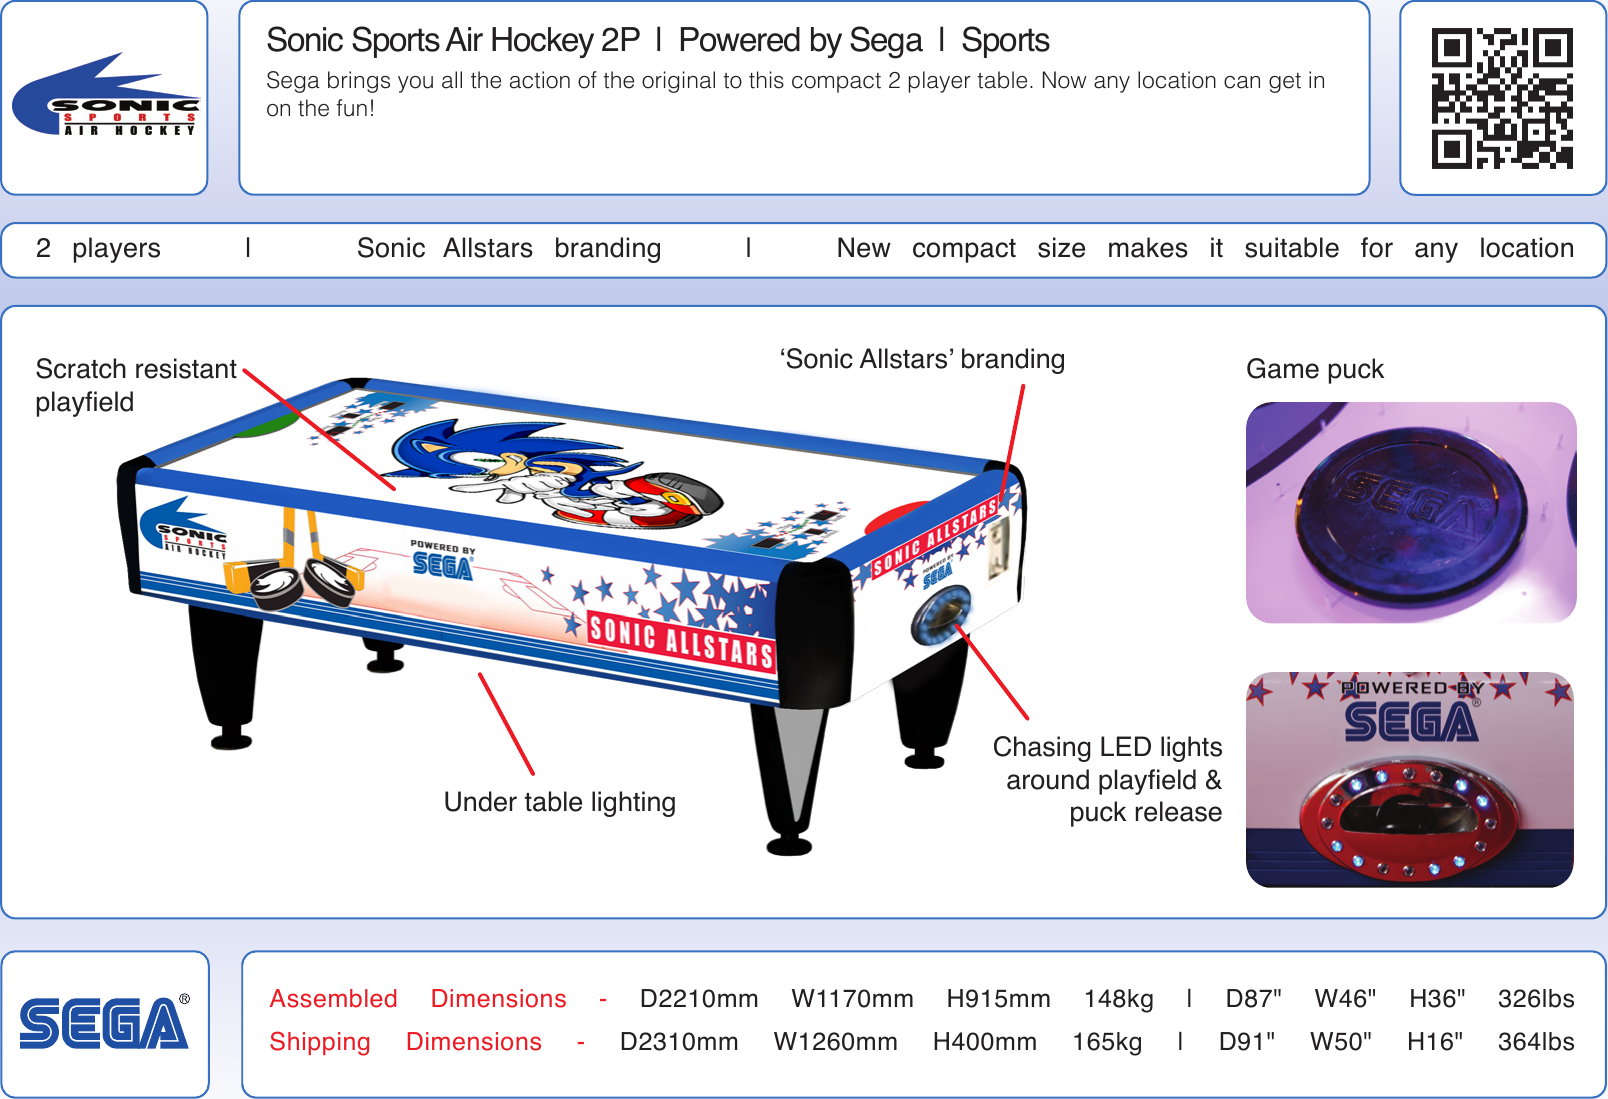 Page 2 of 2 - Arcade Sonic Sports Air Hockey 2P Info Sheet User Manual